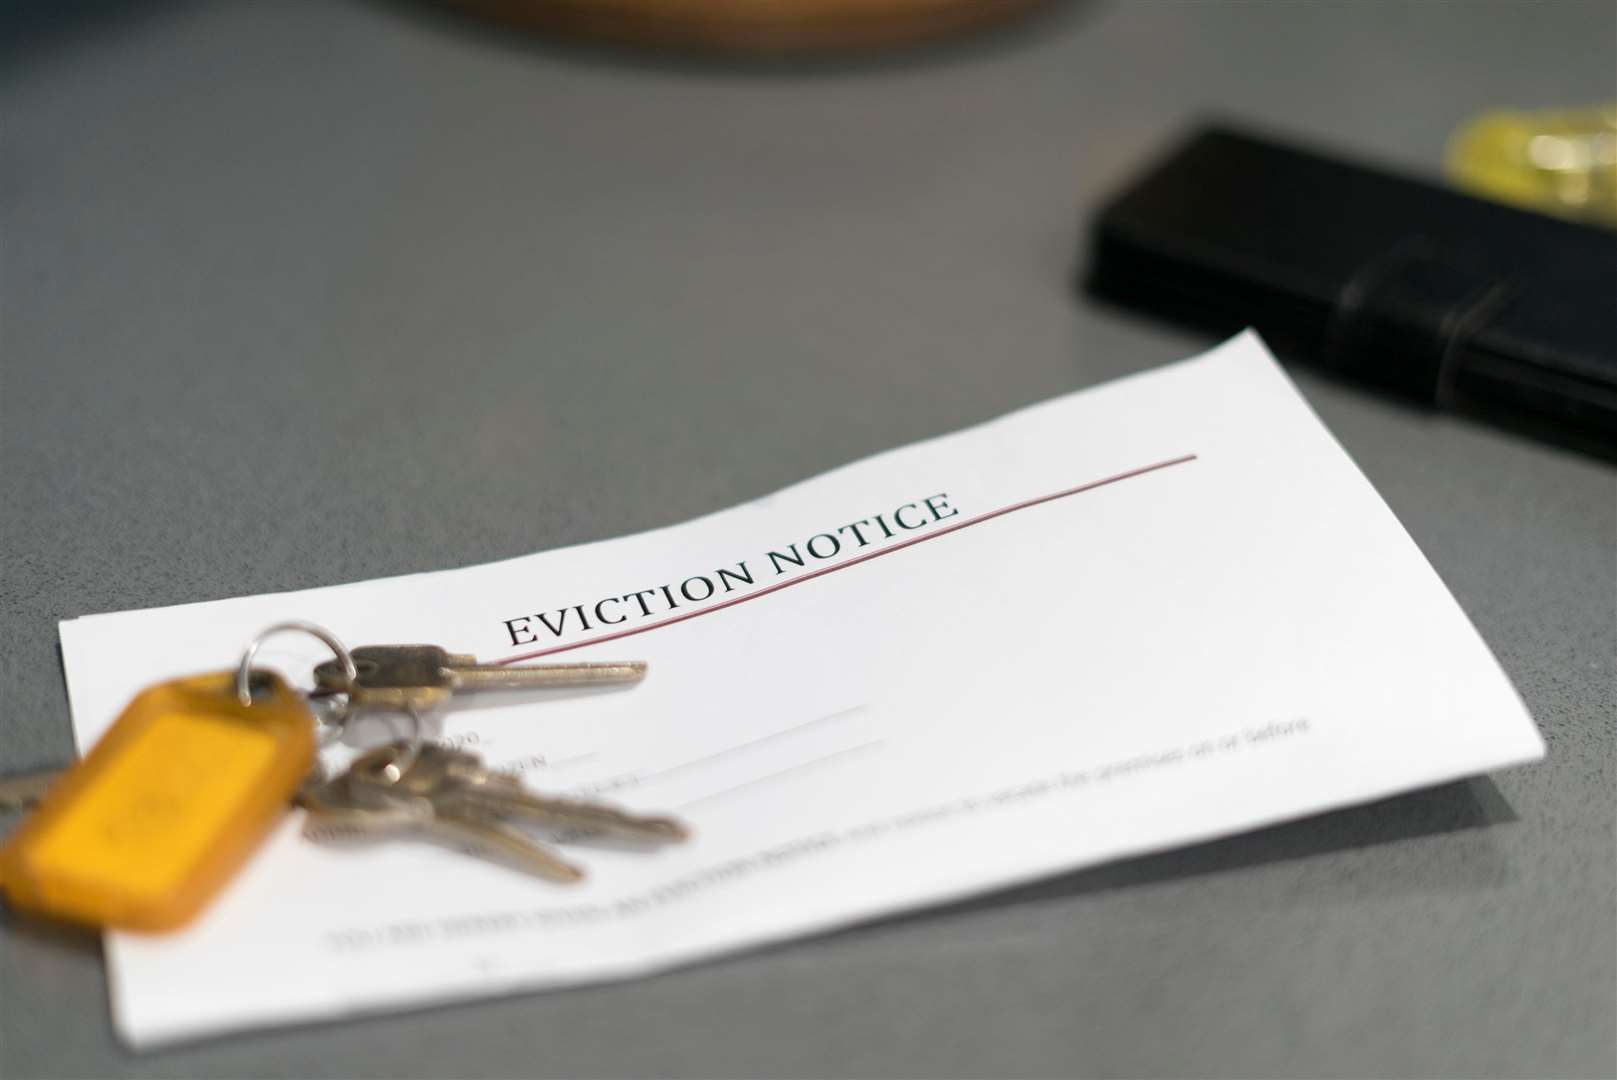 Many are fearful of the eviction notice in the post